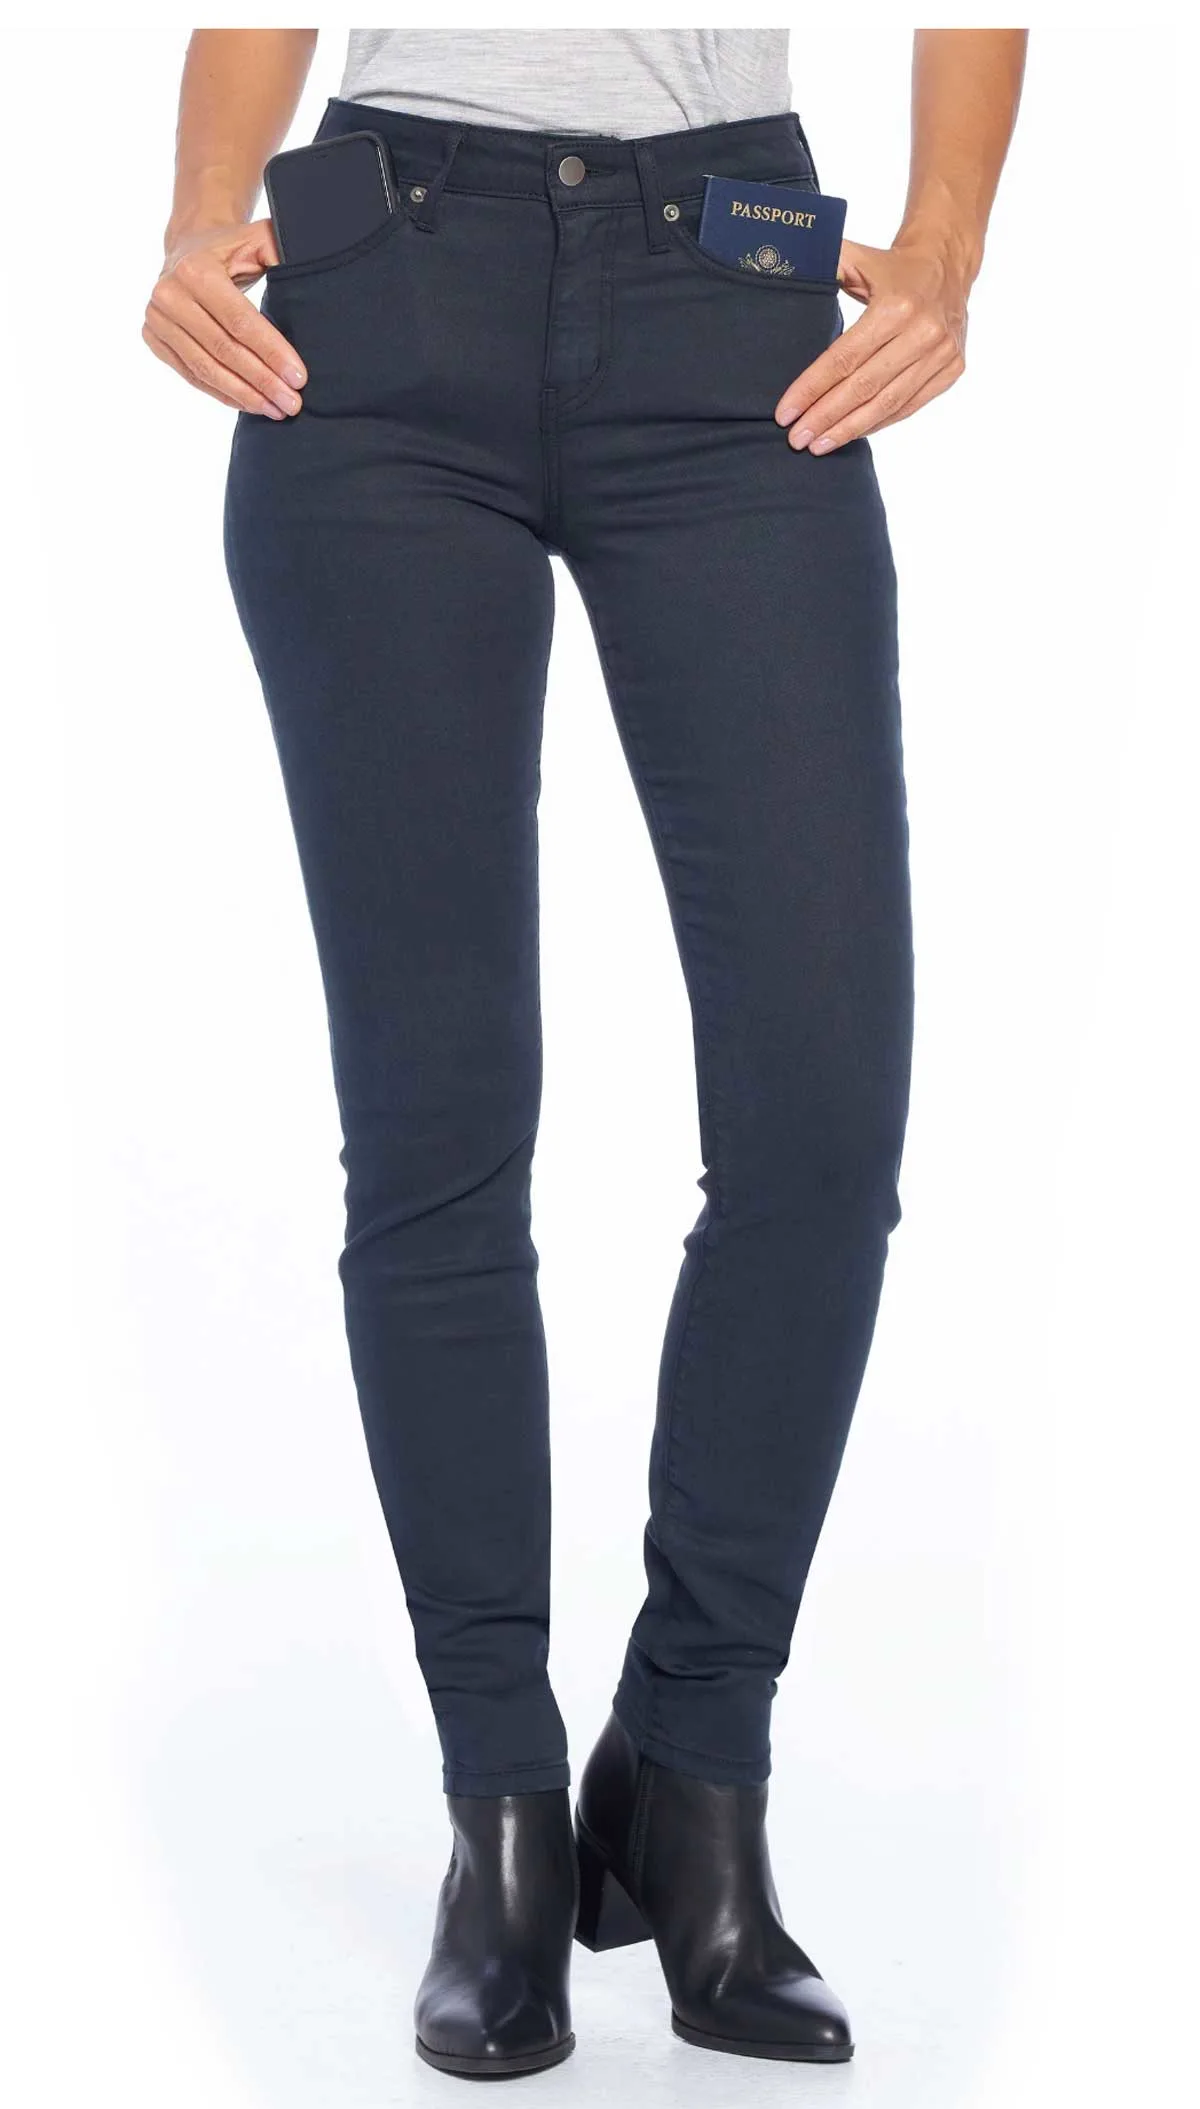 Lady modelling a pair of blue travel jeans.